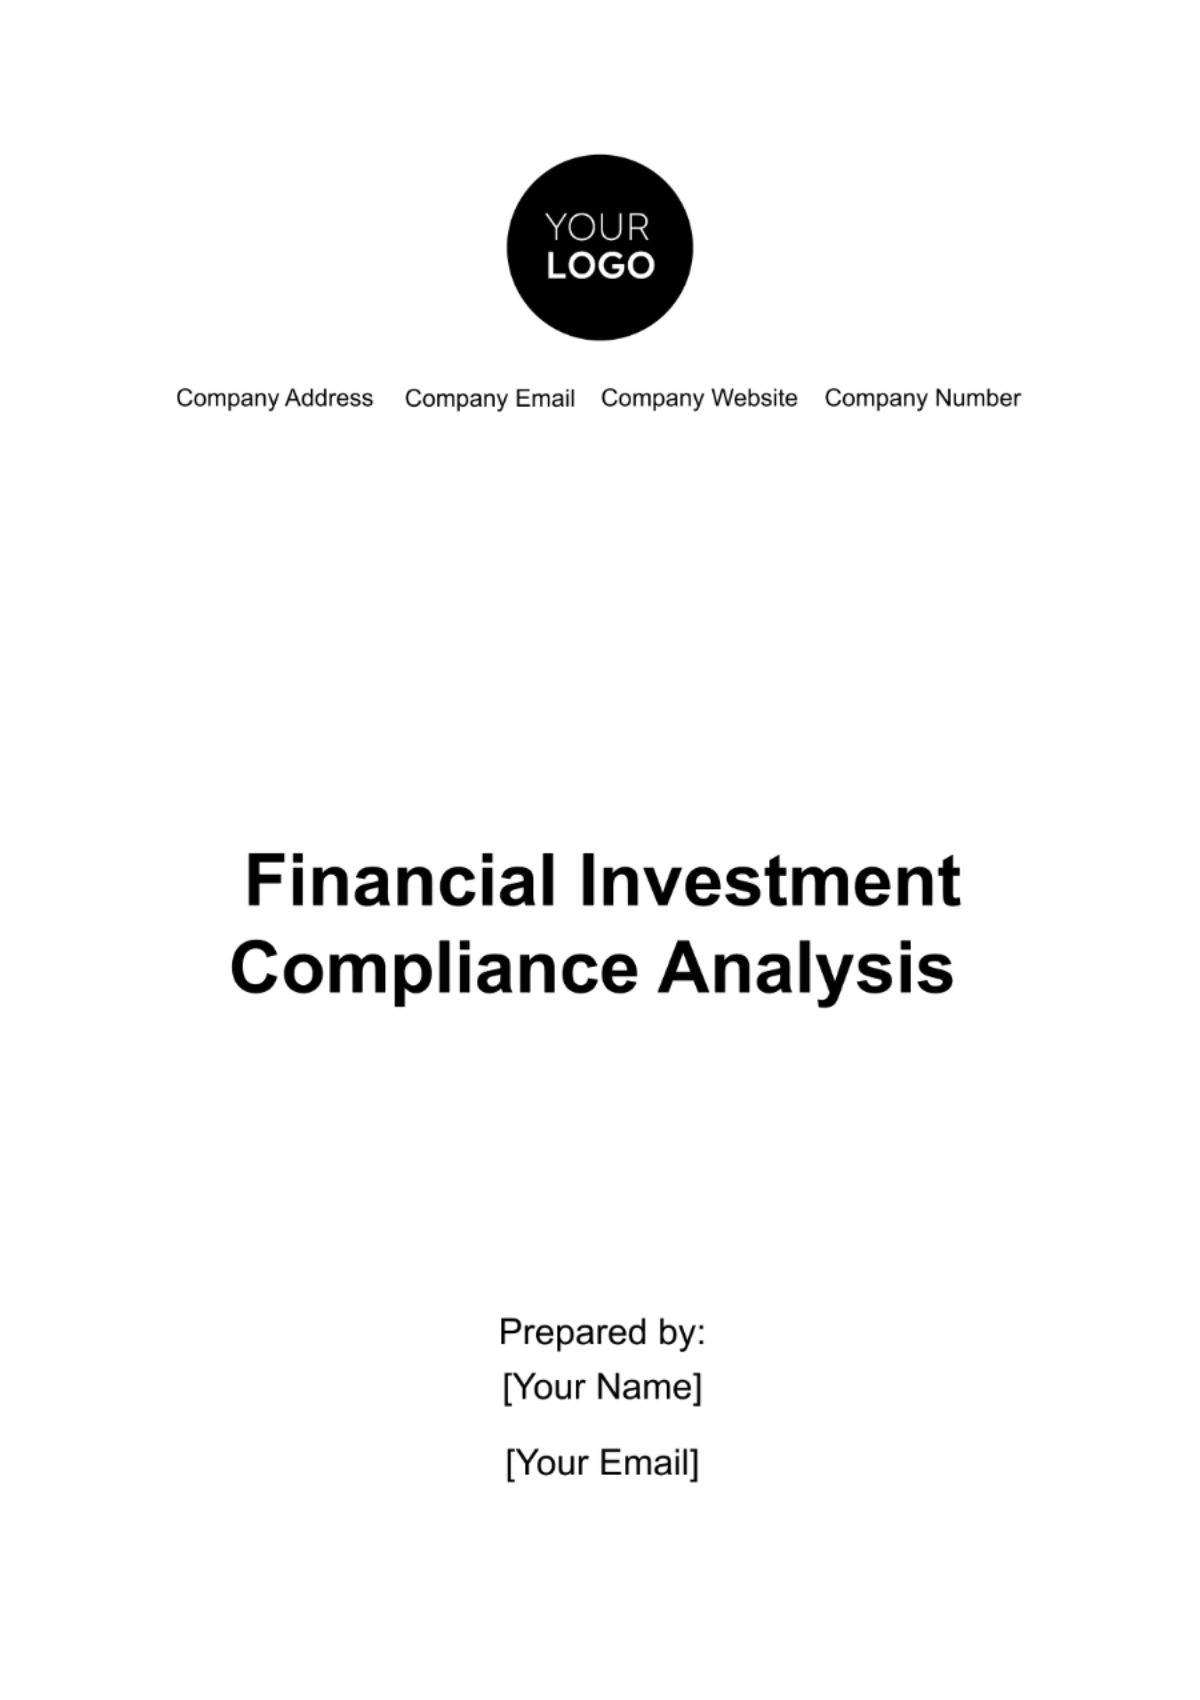 Financial Investment Compliance Analysis Template